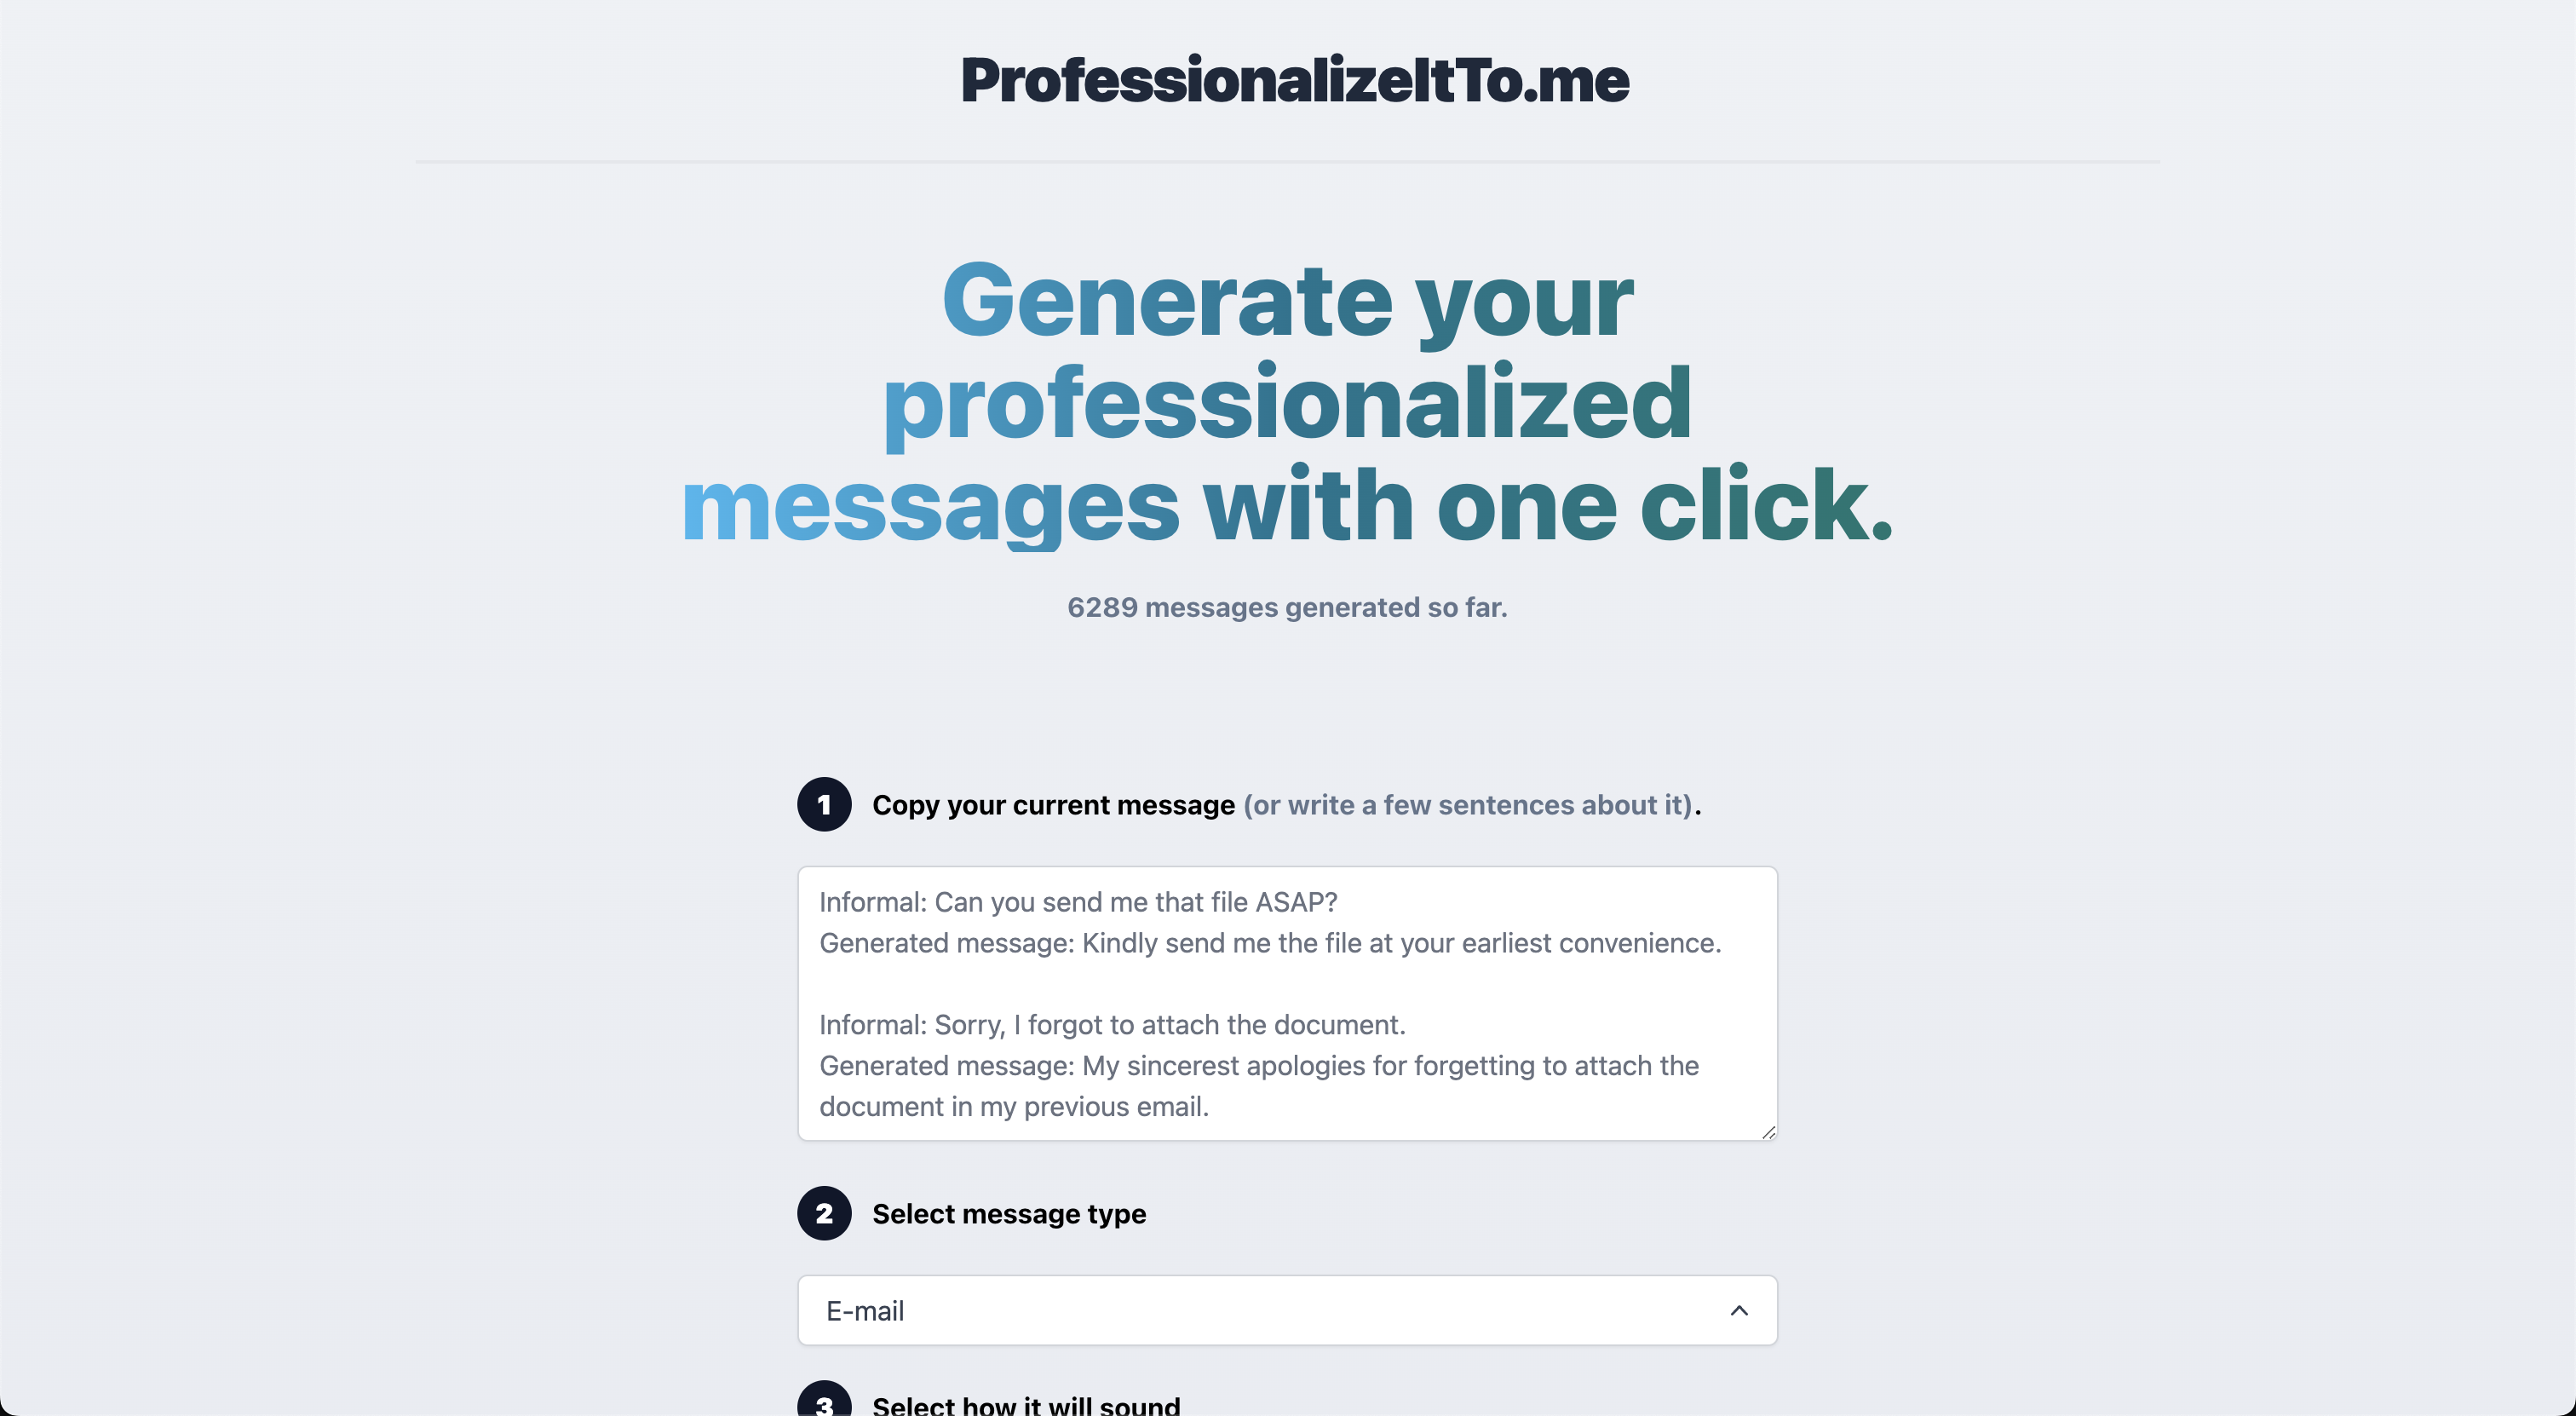 Transform your e-mails into professional masterpieces with Professionalizeitto.me